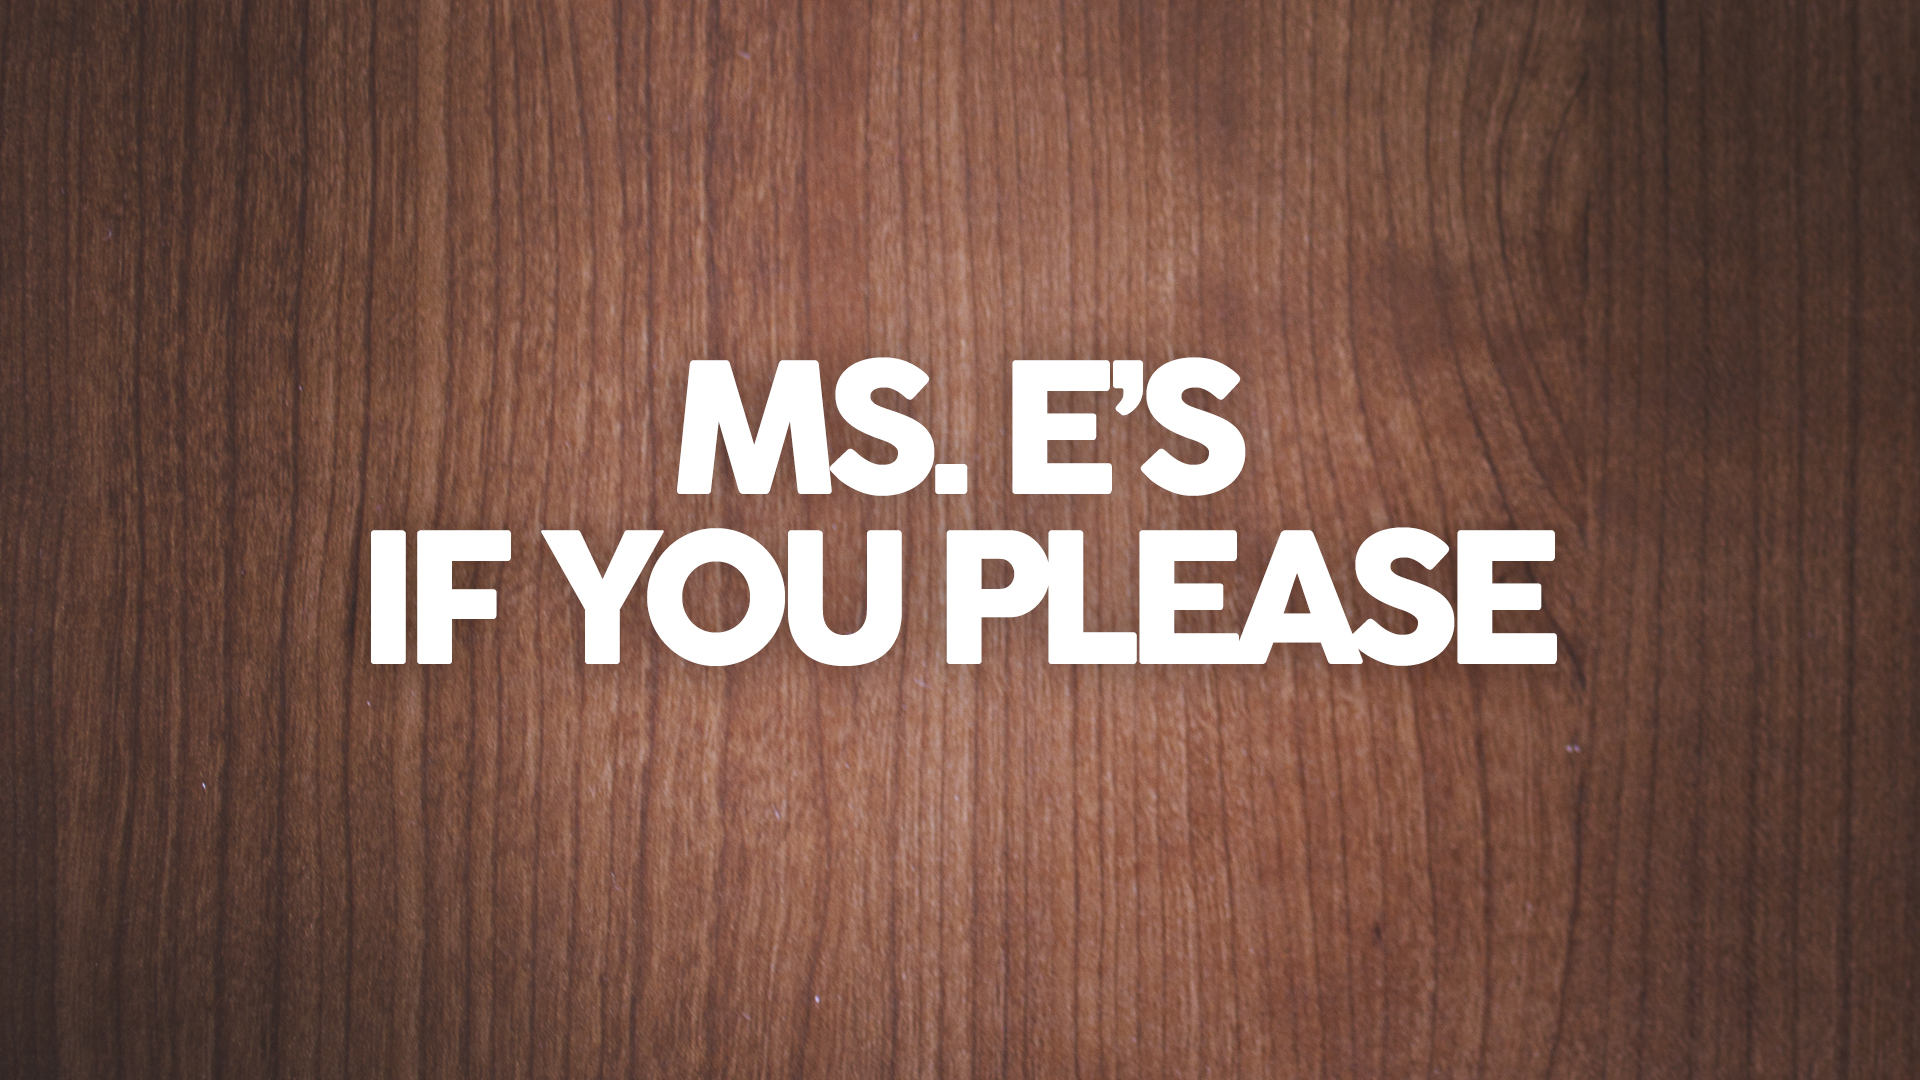 Ms E's Please from Dame's Chicken and Waffles